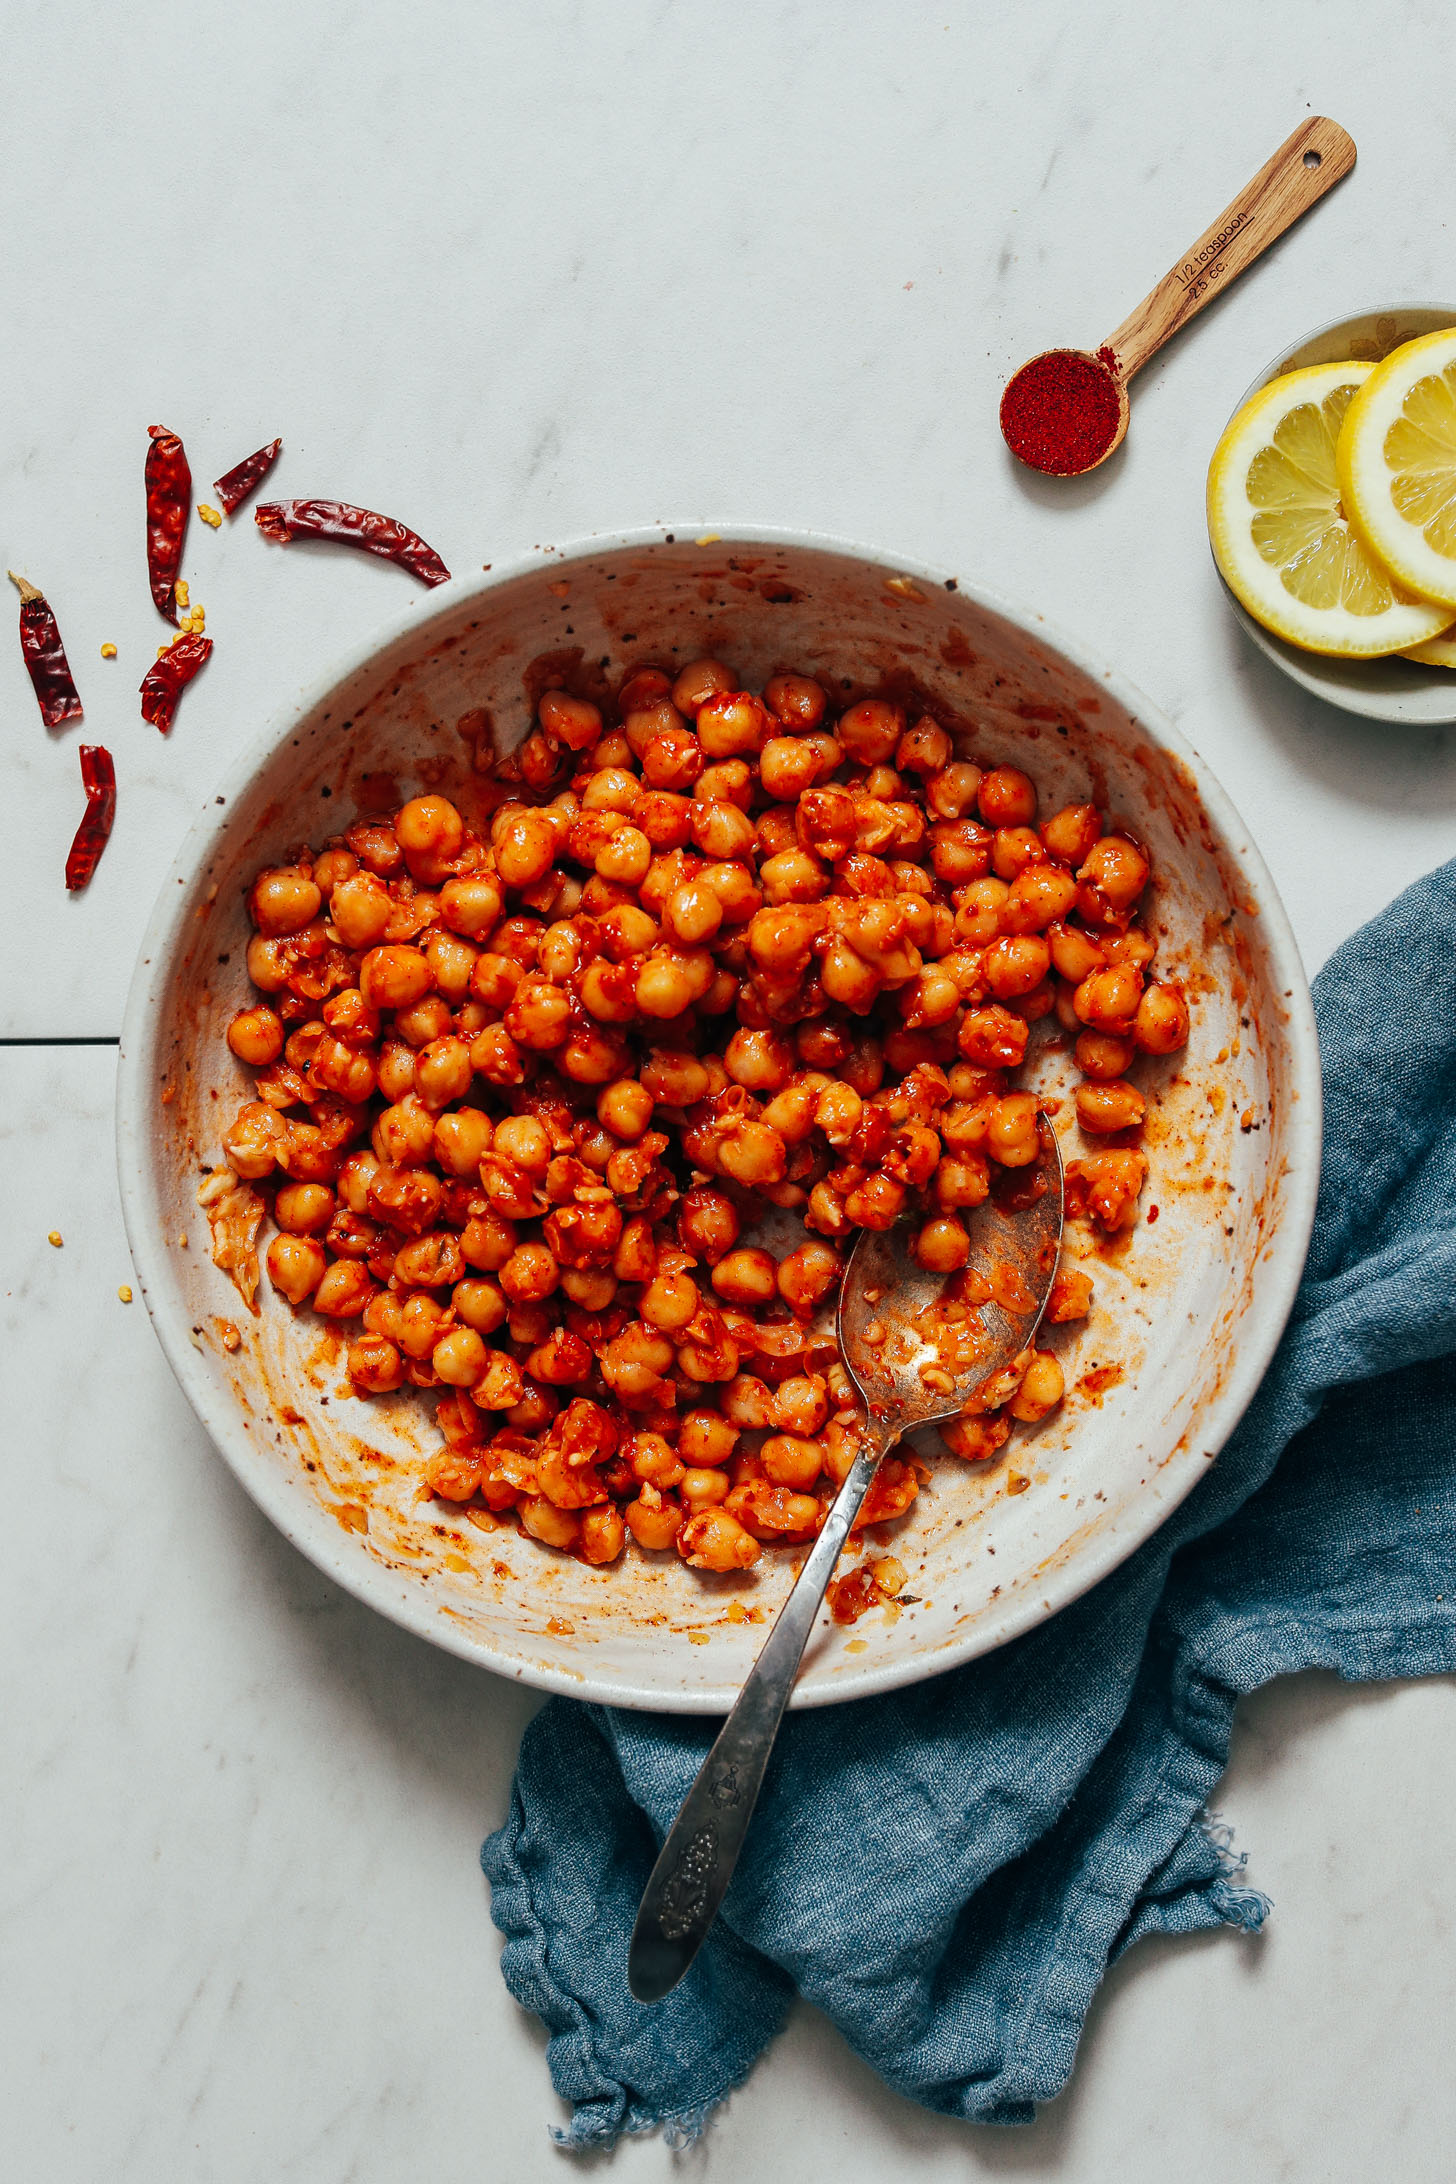 Spoon in a bowl of Harissa Marinated Chickpeas